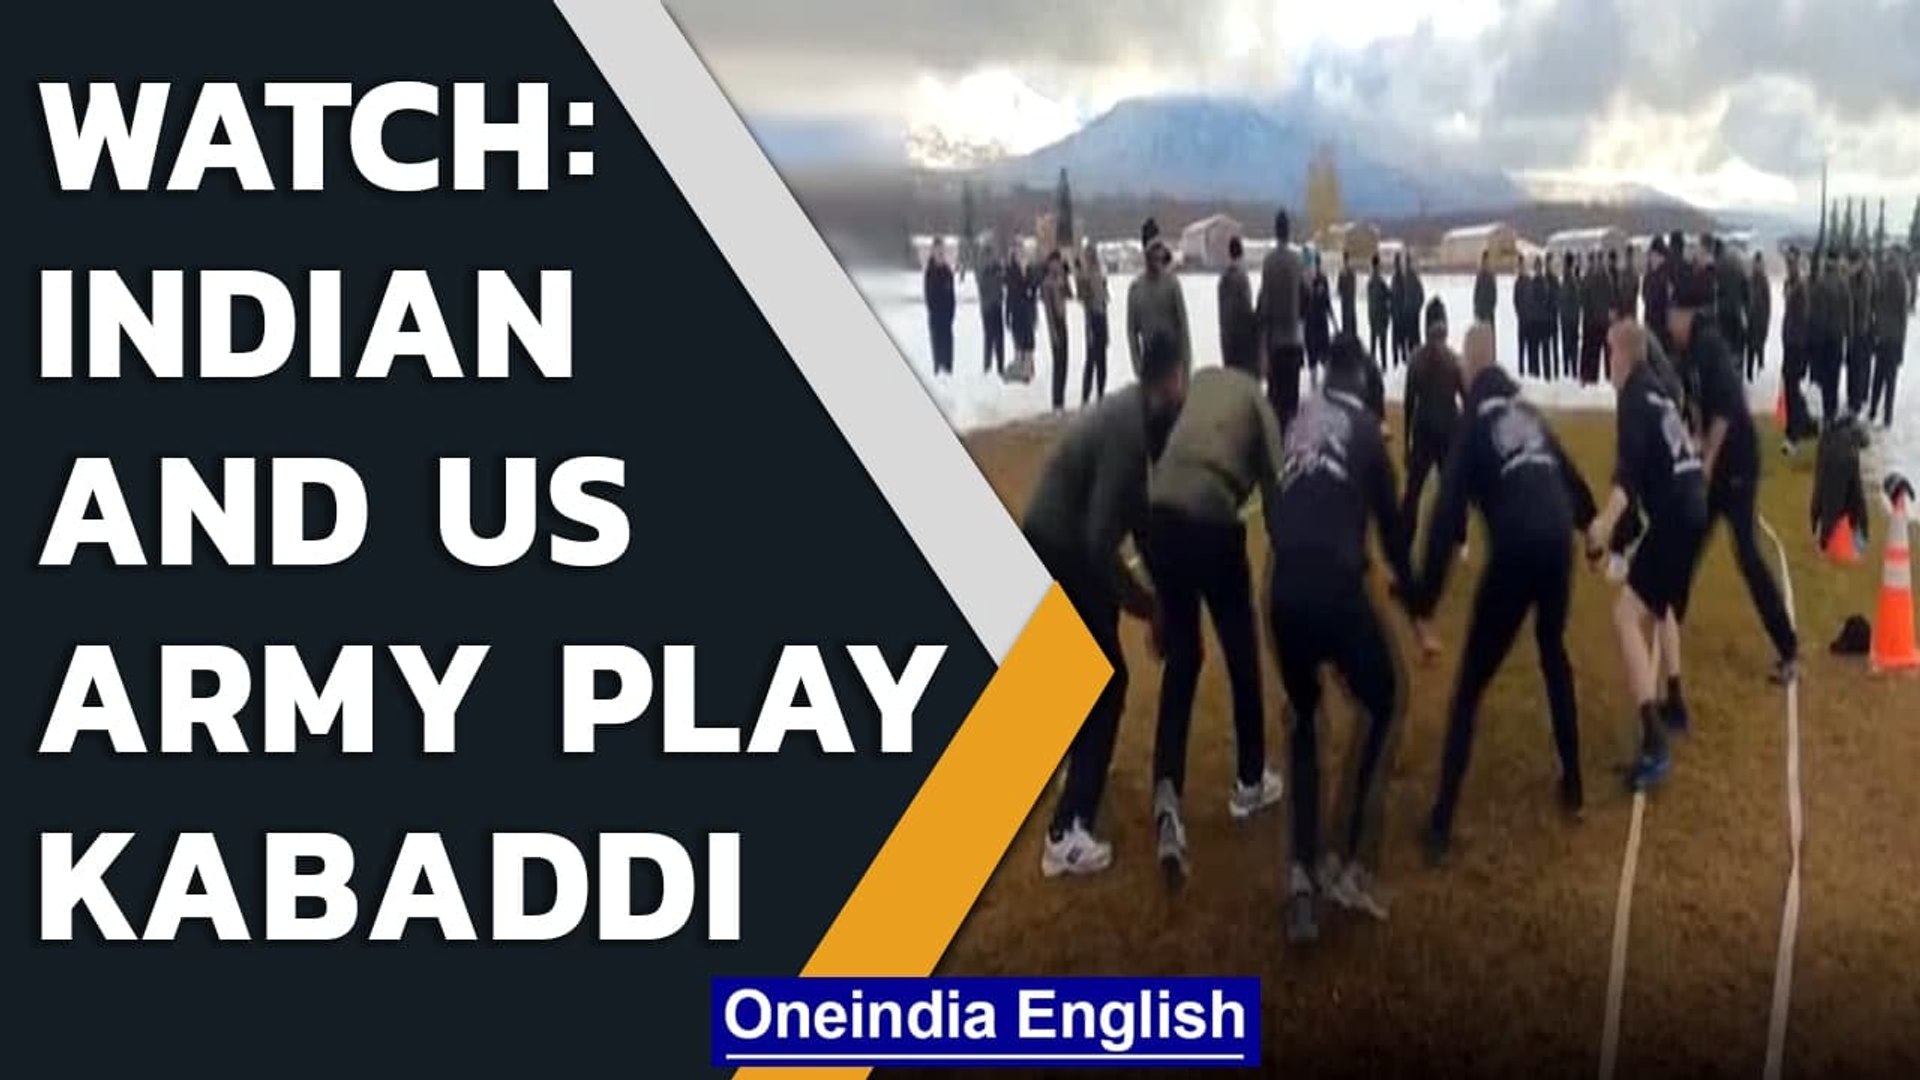 Indian and US soldiers play kabaddi and other games in Alaska | Ex Yudh Abhyas 21 | Oneindia News